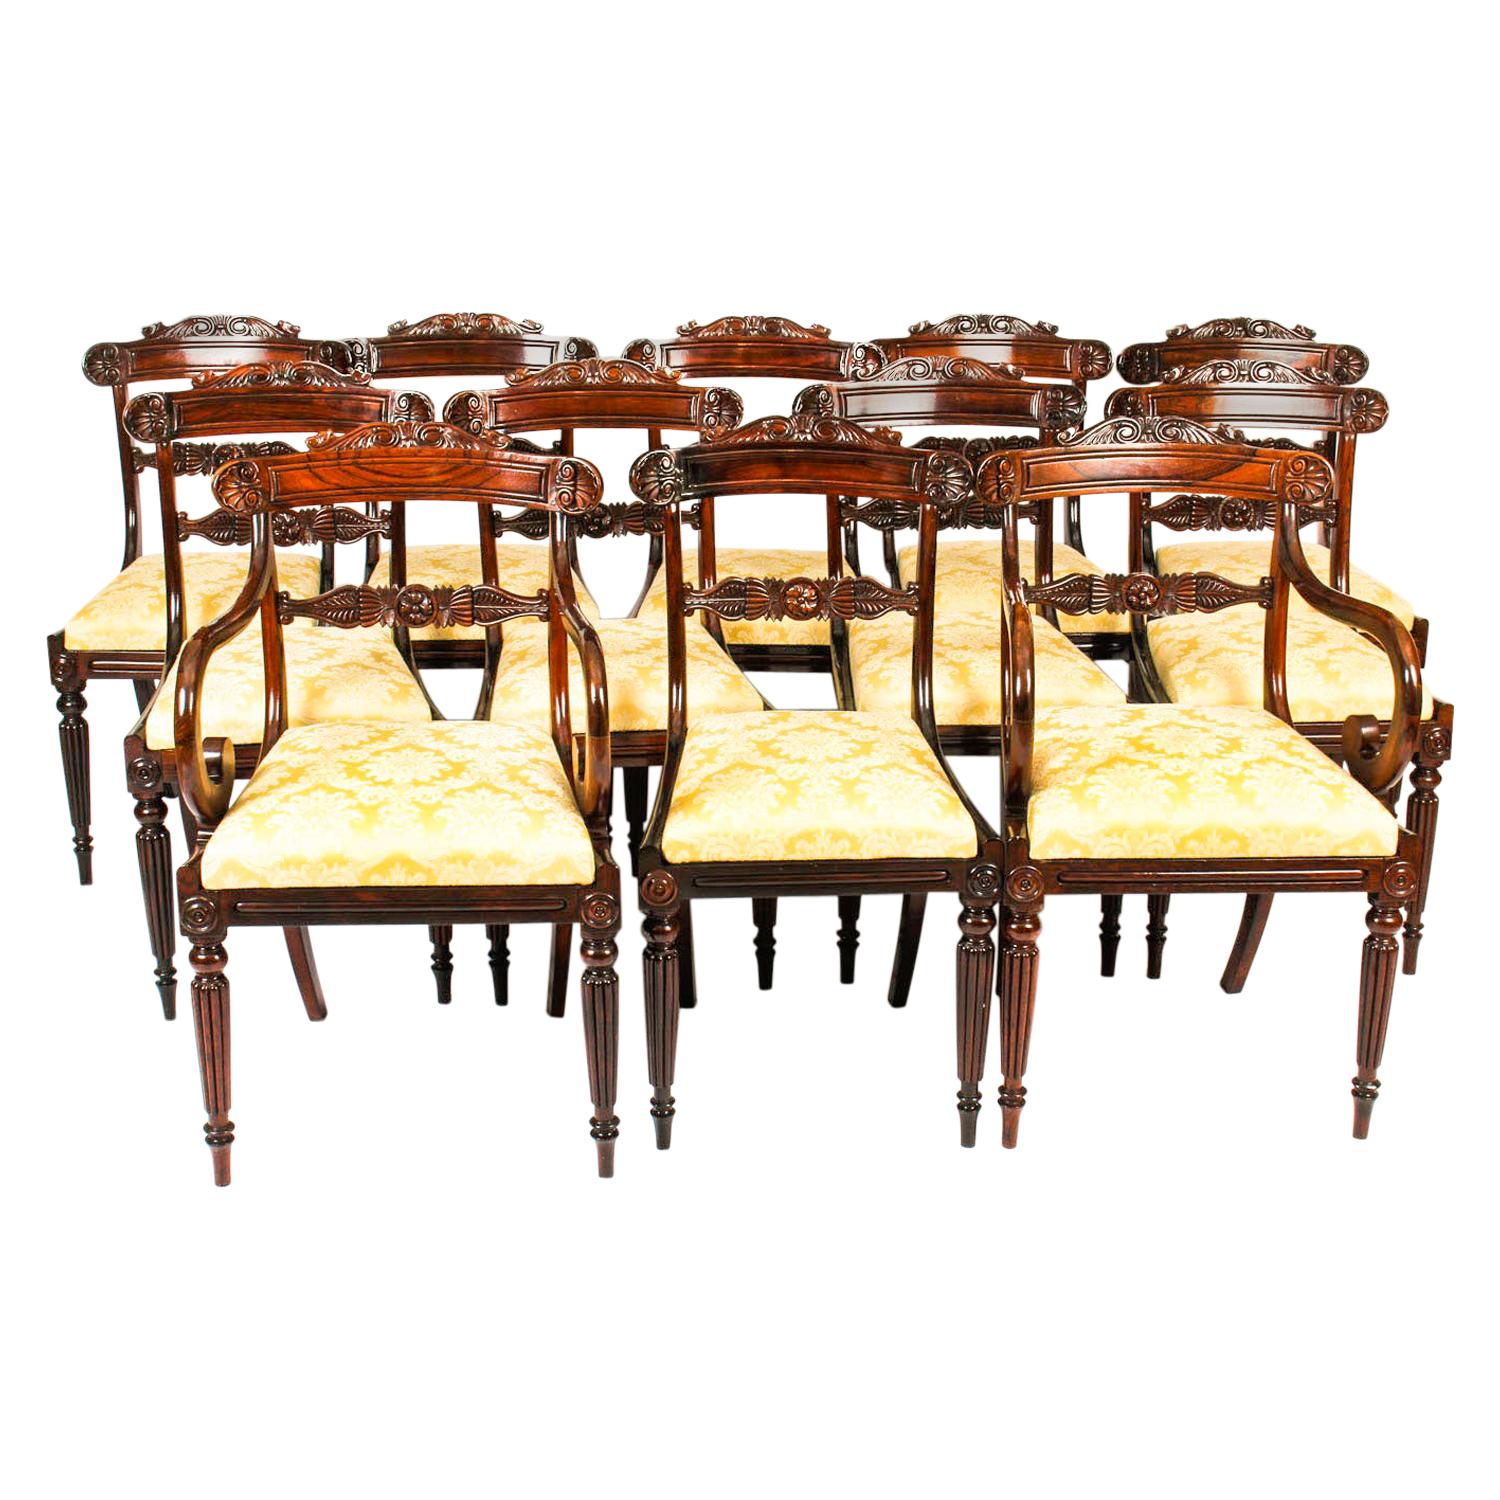 Antique Set 12 William IV Dining Chairs, Attributed to Gillows 19th Century